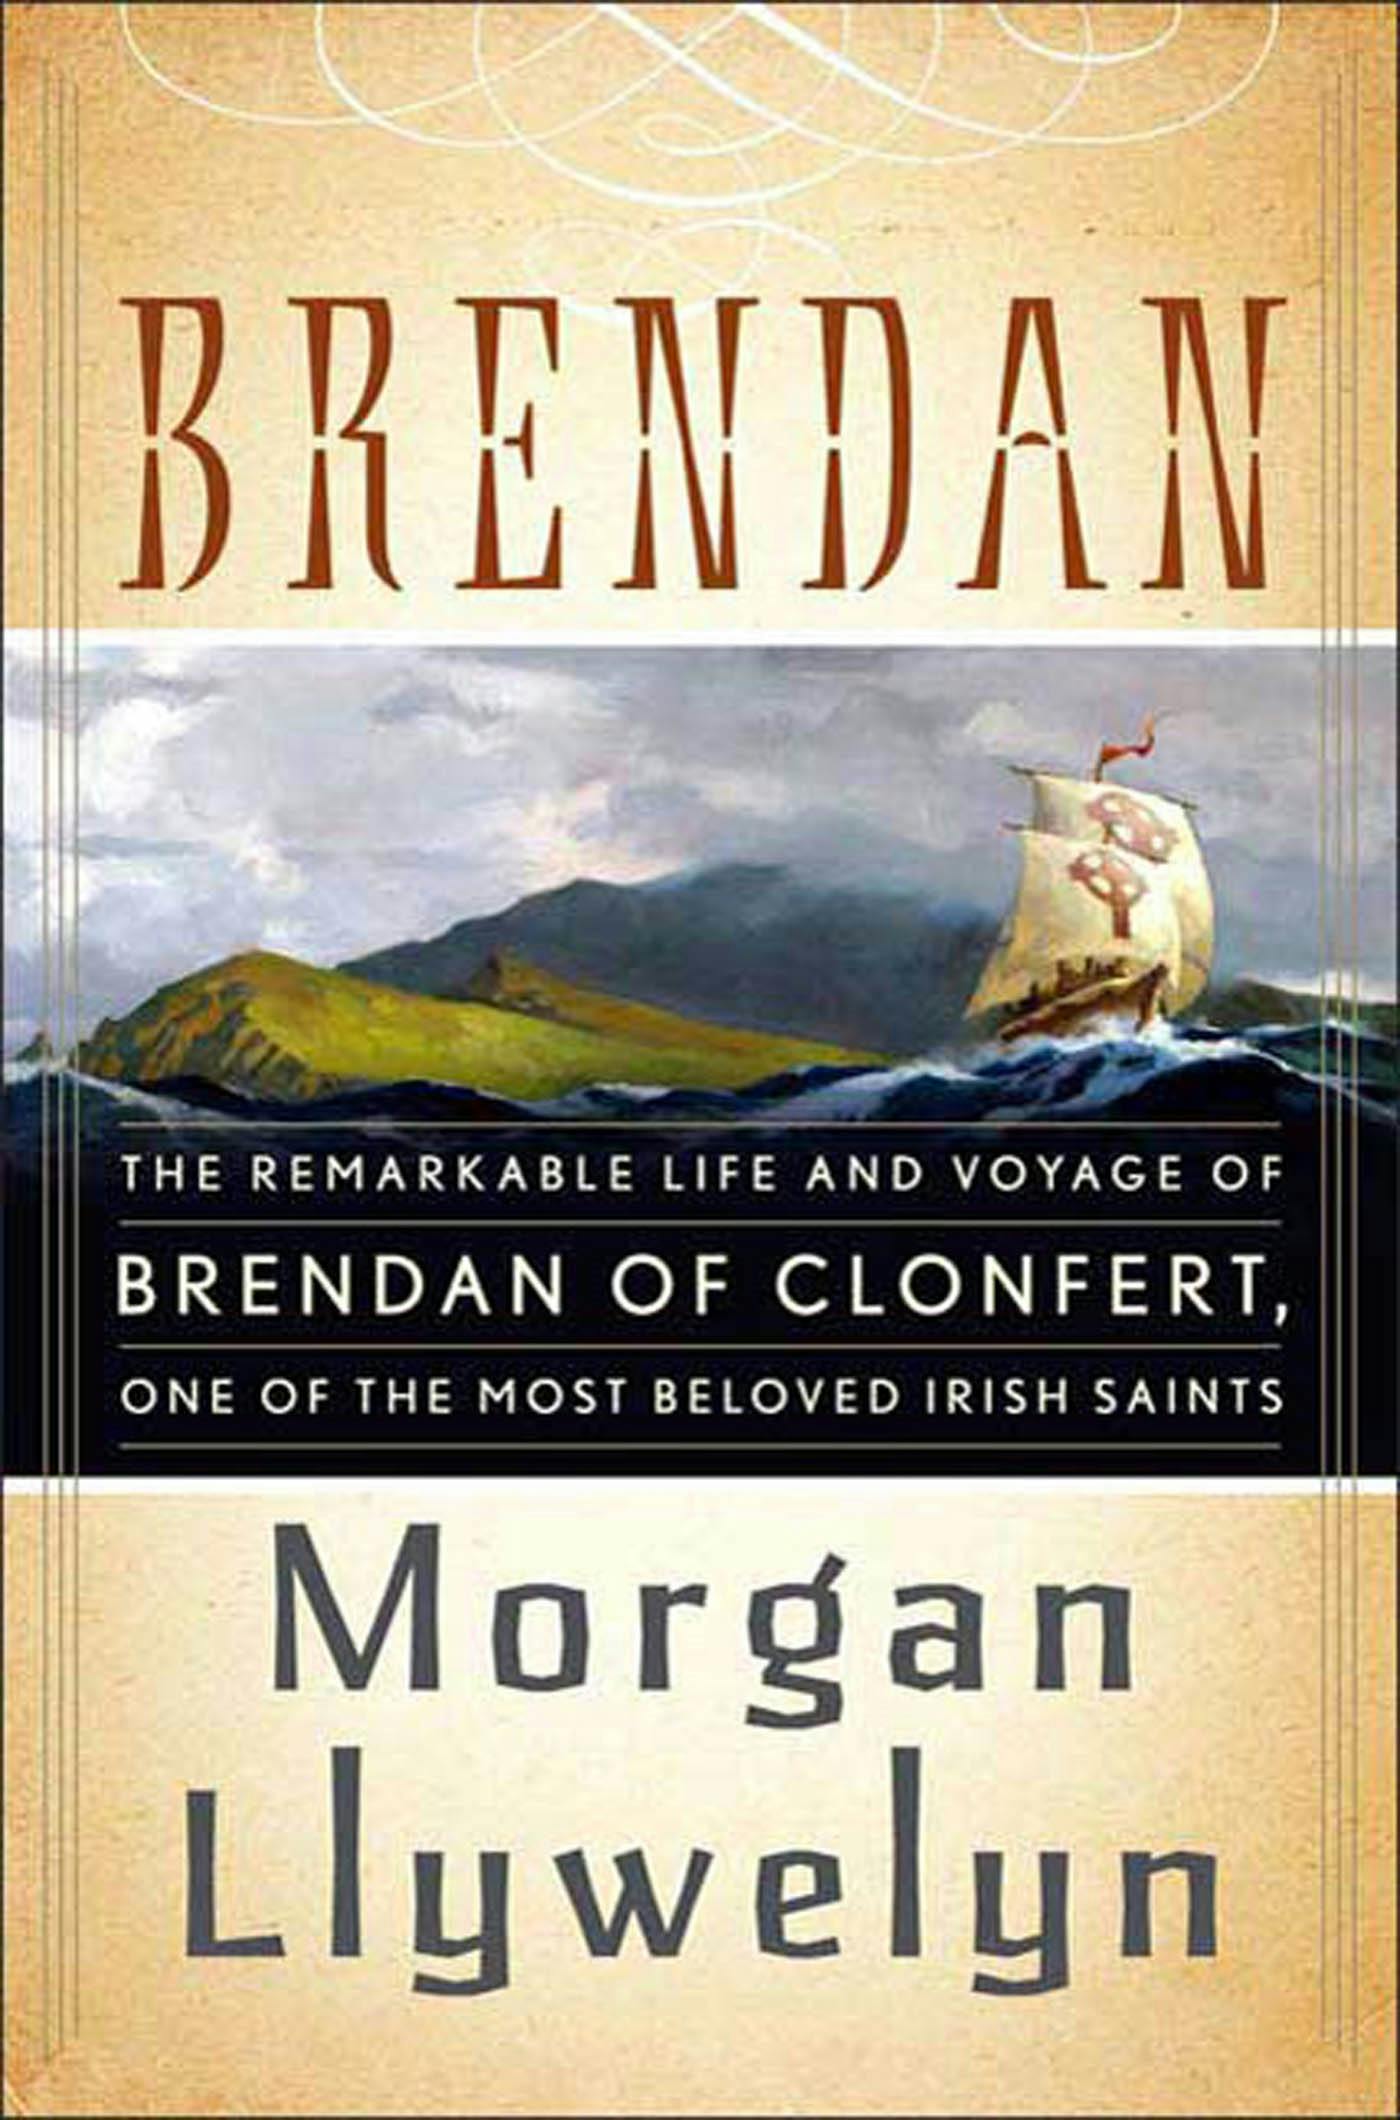 Cover for the book titled as: Brendan